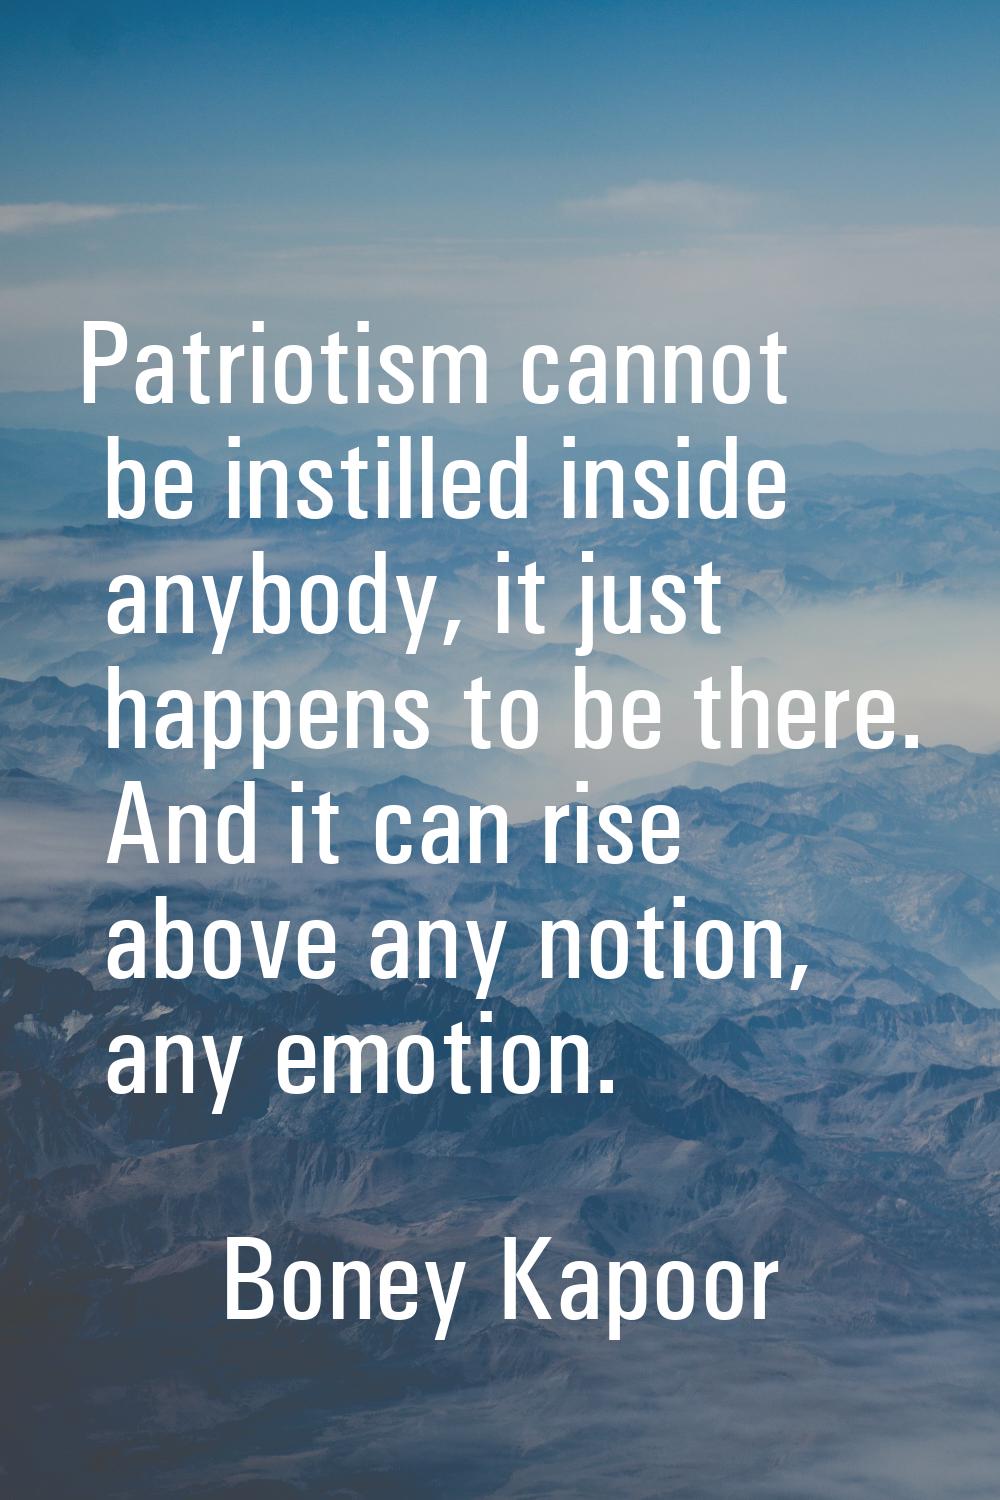 Patriotism cannot be instilled inside anybody, it just happens to be there. And it can rise above a